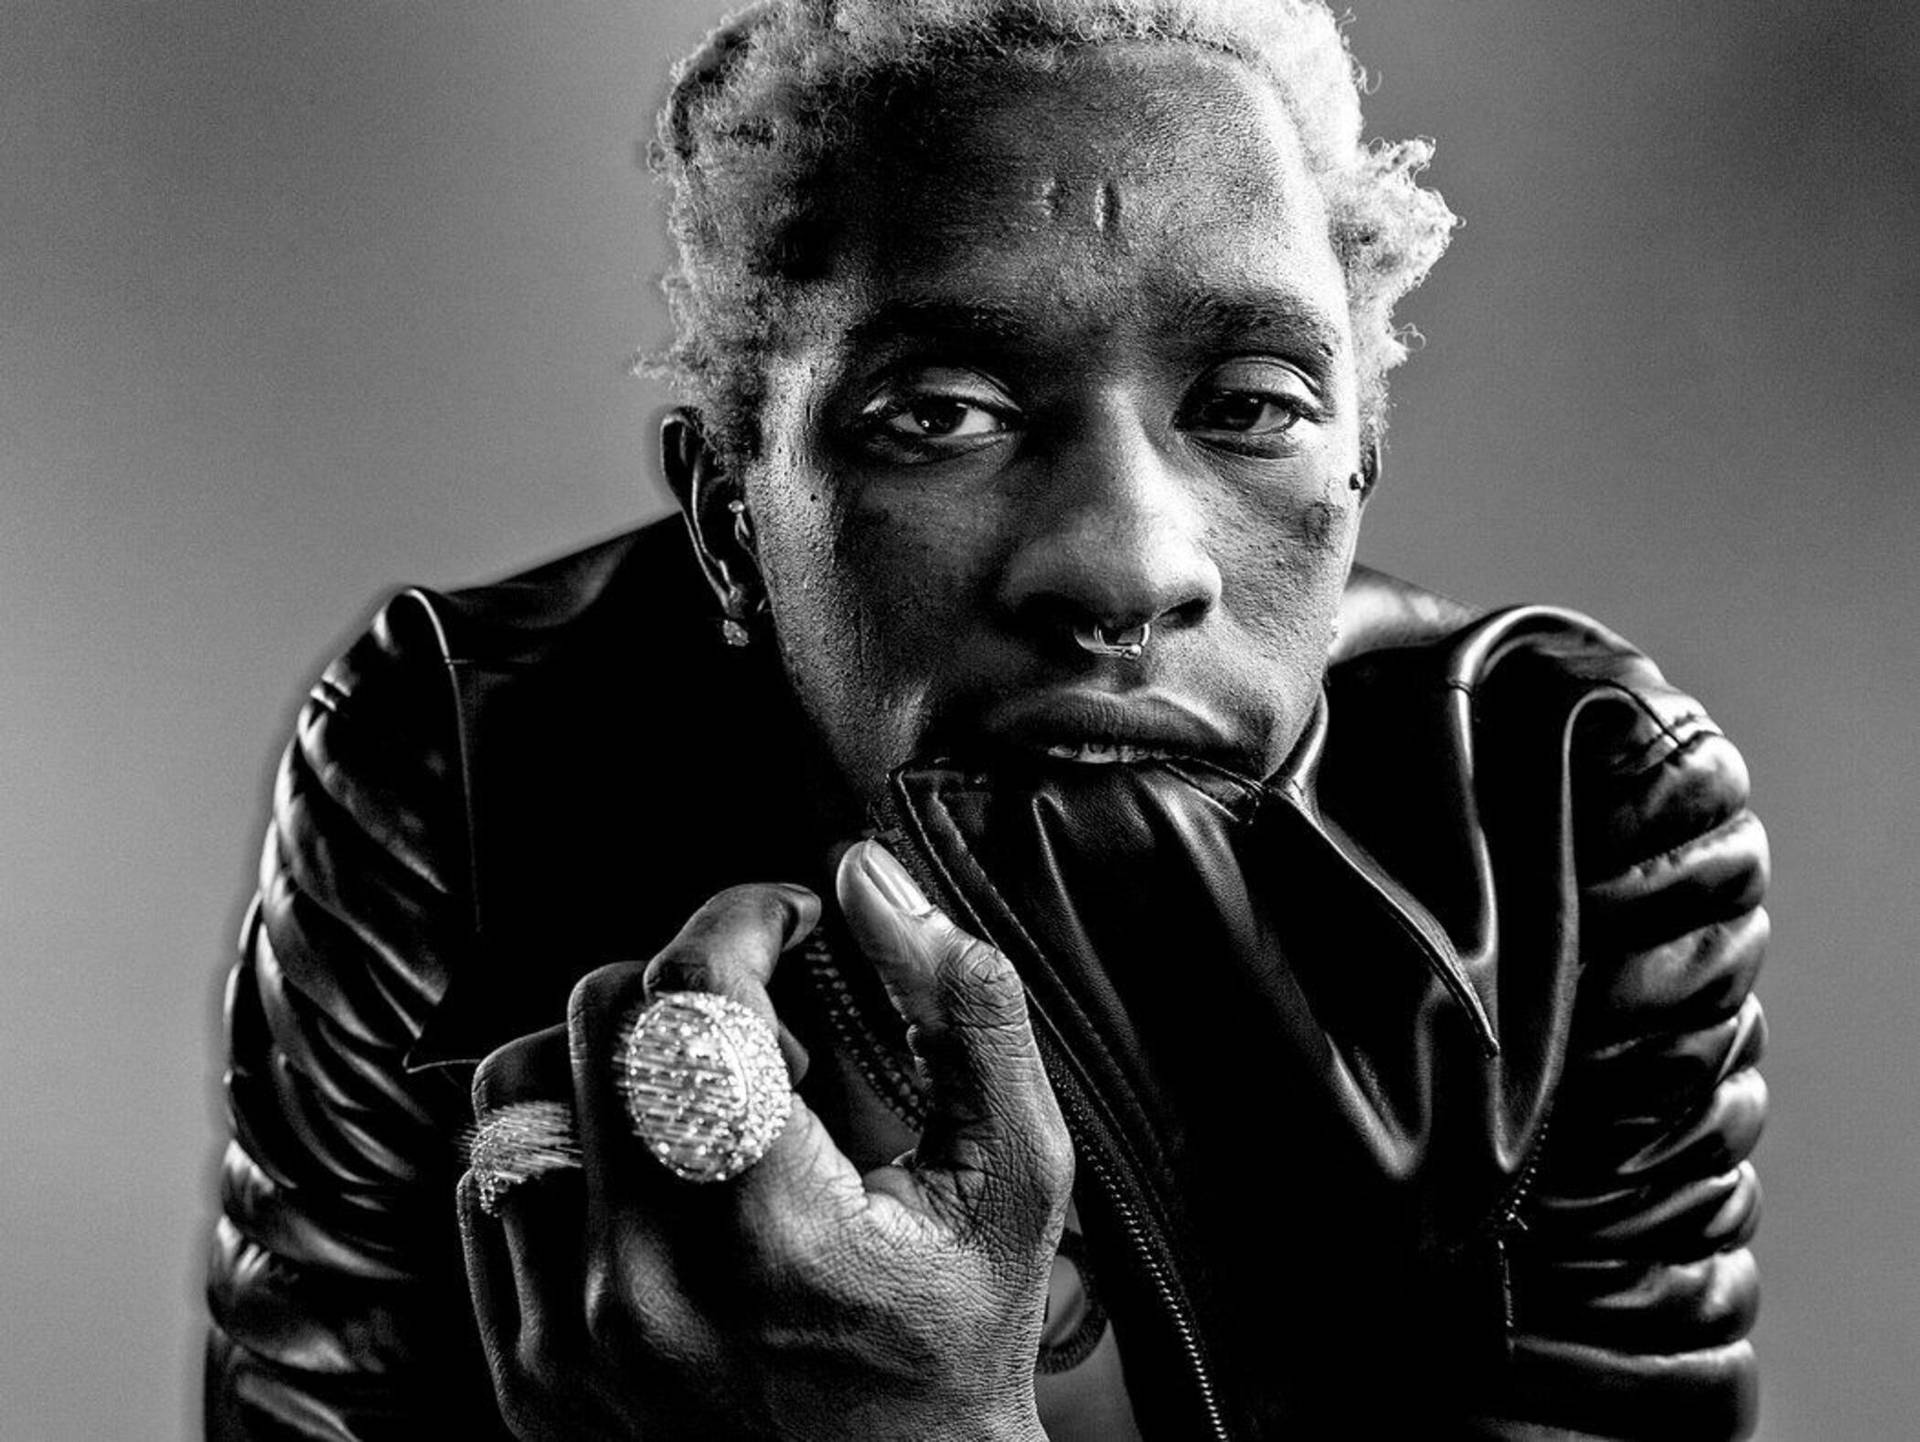 Dynamic Rapper Young Thug Photoshoot for Fans Wallpaper